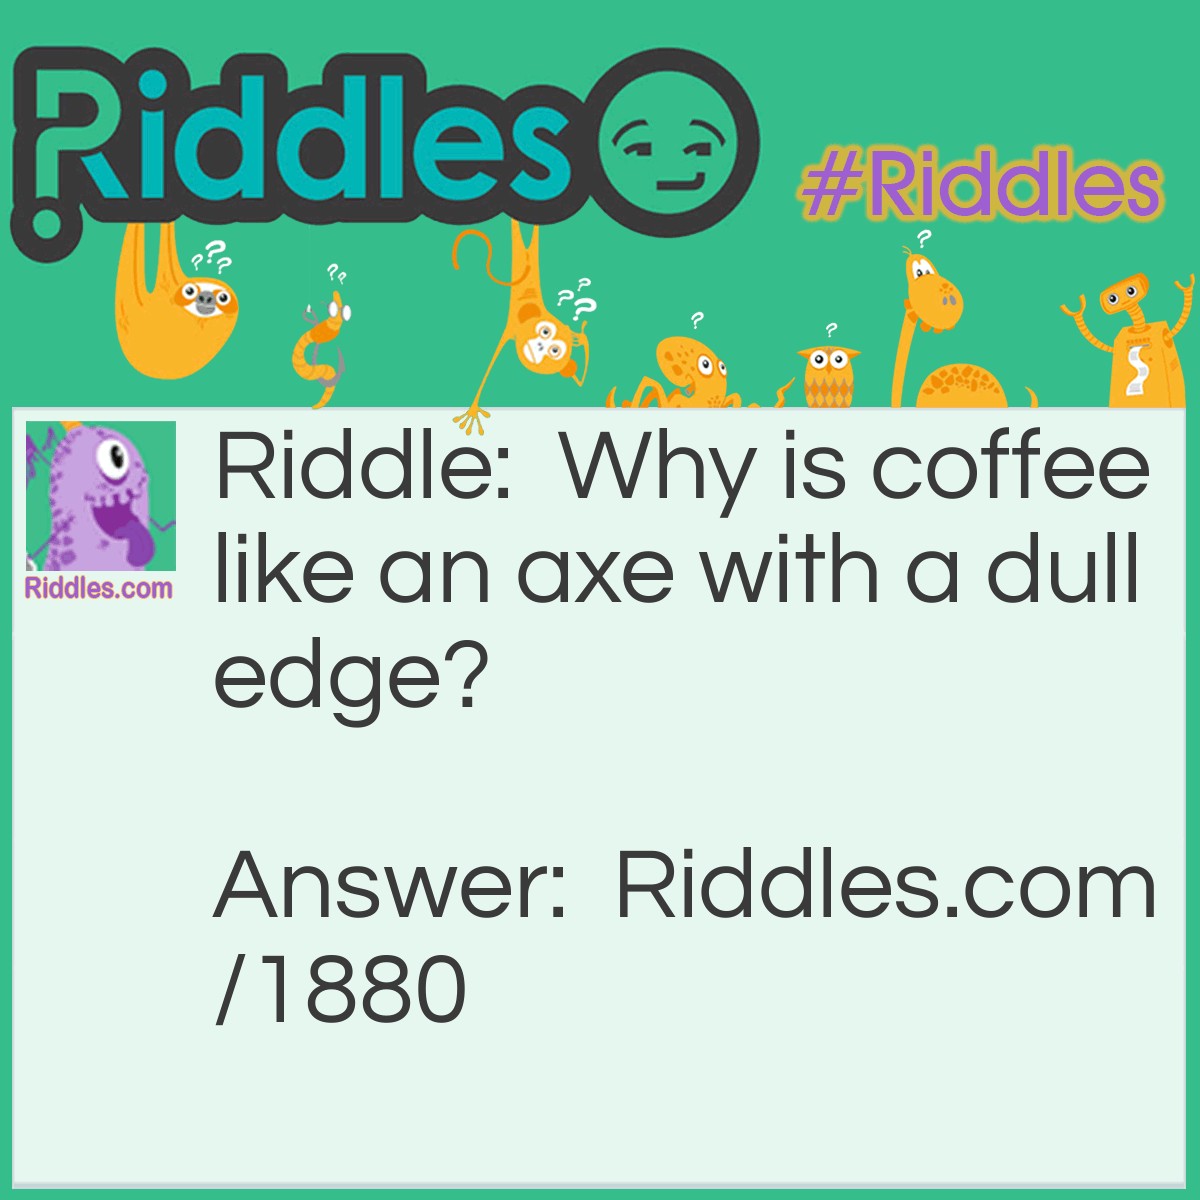 Riddle: Why is coffee like an axe with a dull edge? Answer: Because it must be ground before it is used.